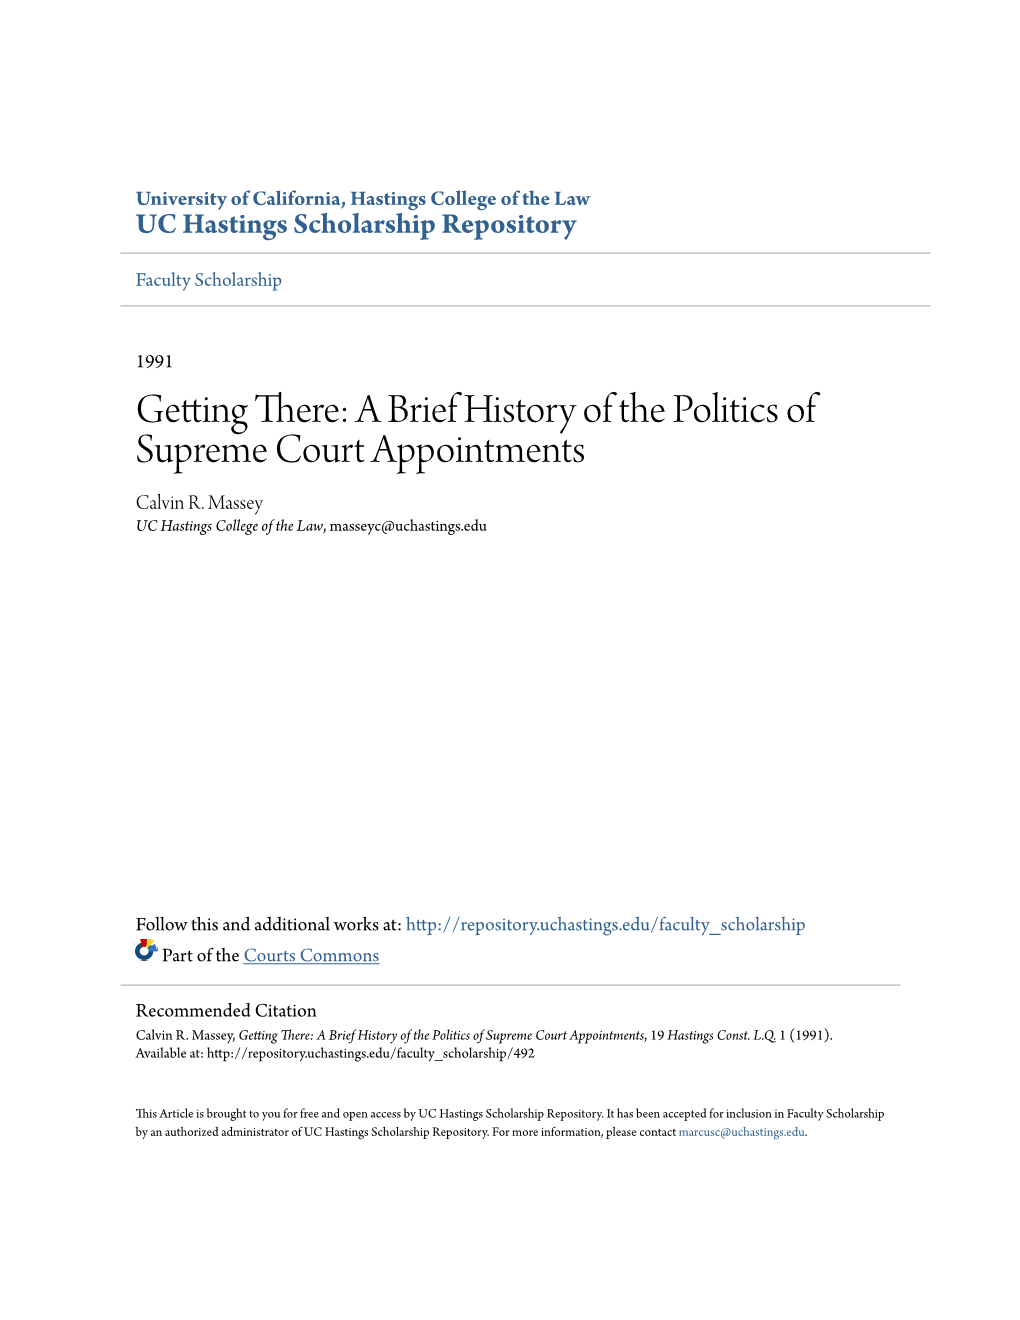 A Brief History of the Politics of Supreme Court Appointments Calvin R